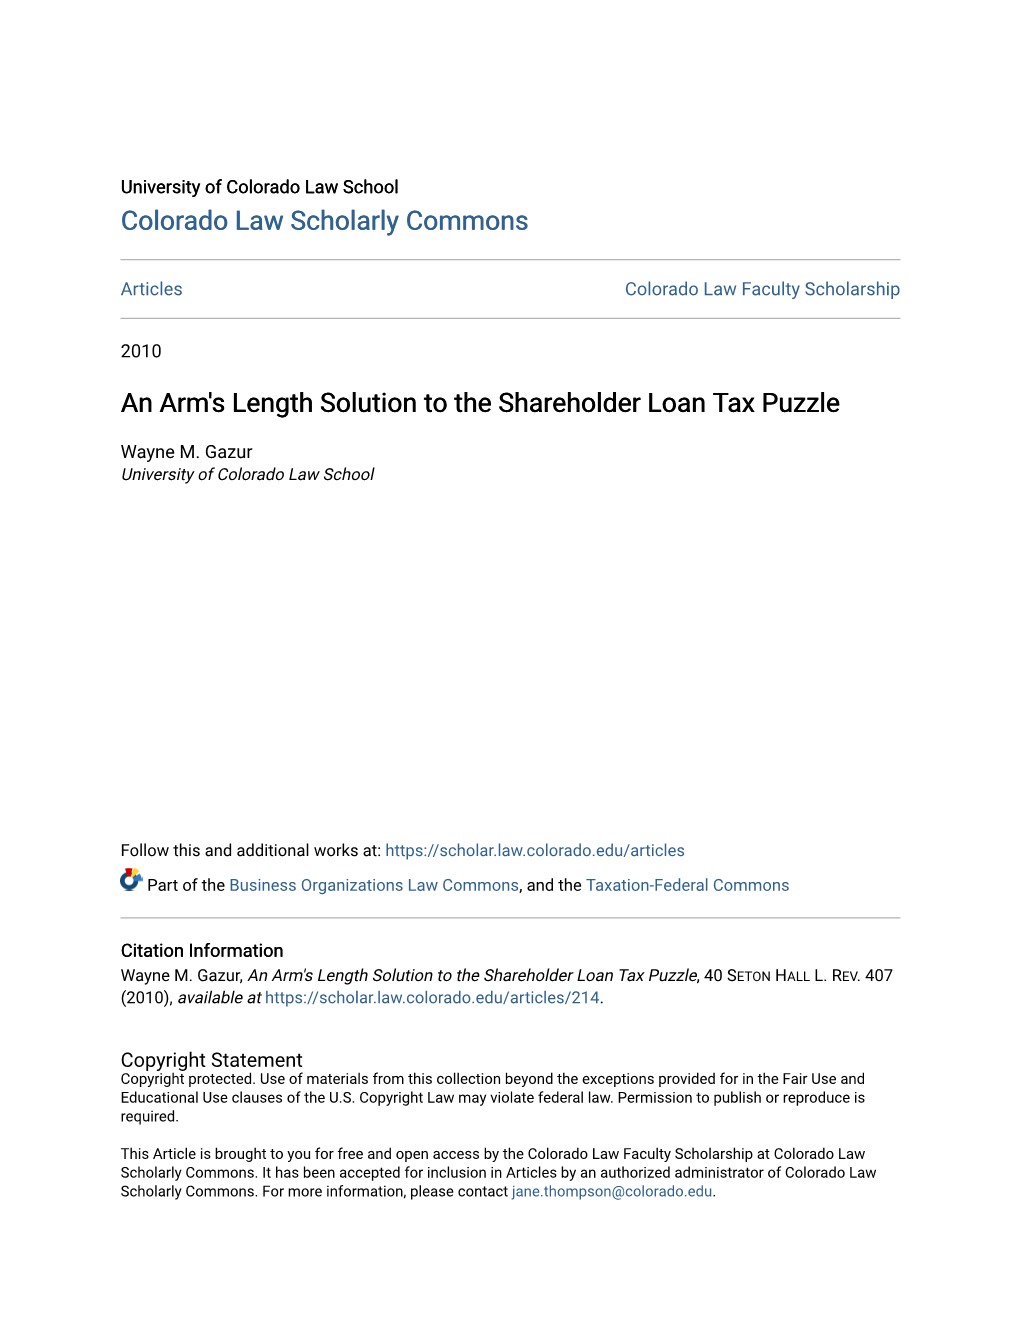 An Arm's Length Solution to the Shareholder Loan Tax Puzzle